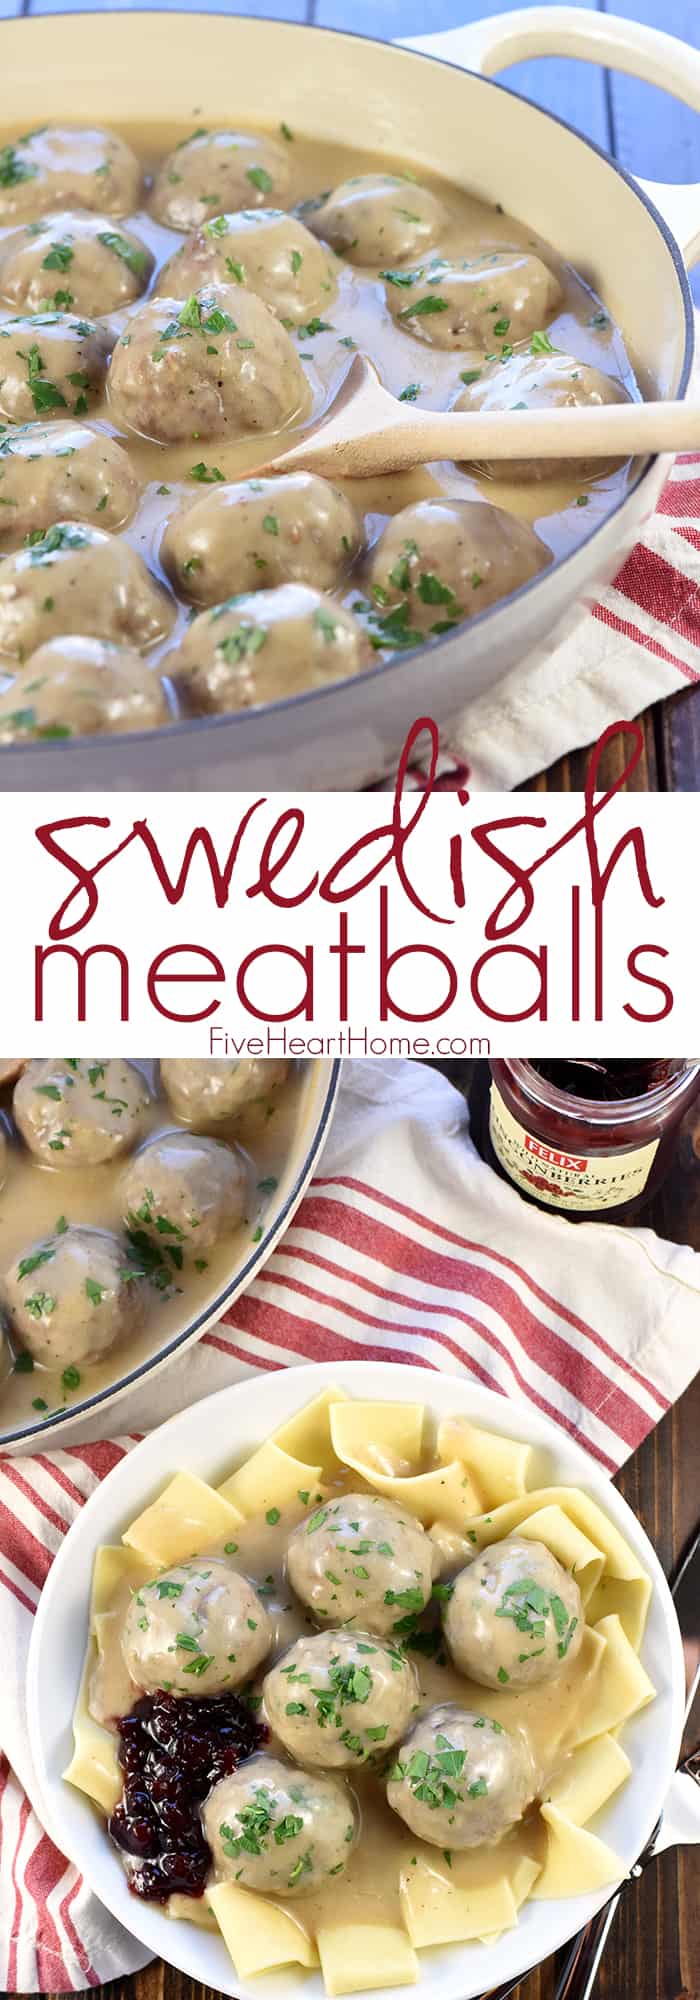 https://www.fivehearthome.com/wp-content/uploads/2017/05/Swedish-Meatballs-Easy-Dinner-Recipe-by-Five-Heart-Home_700pxCollage.jpg